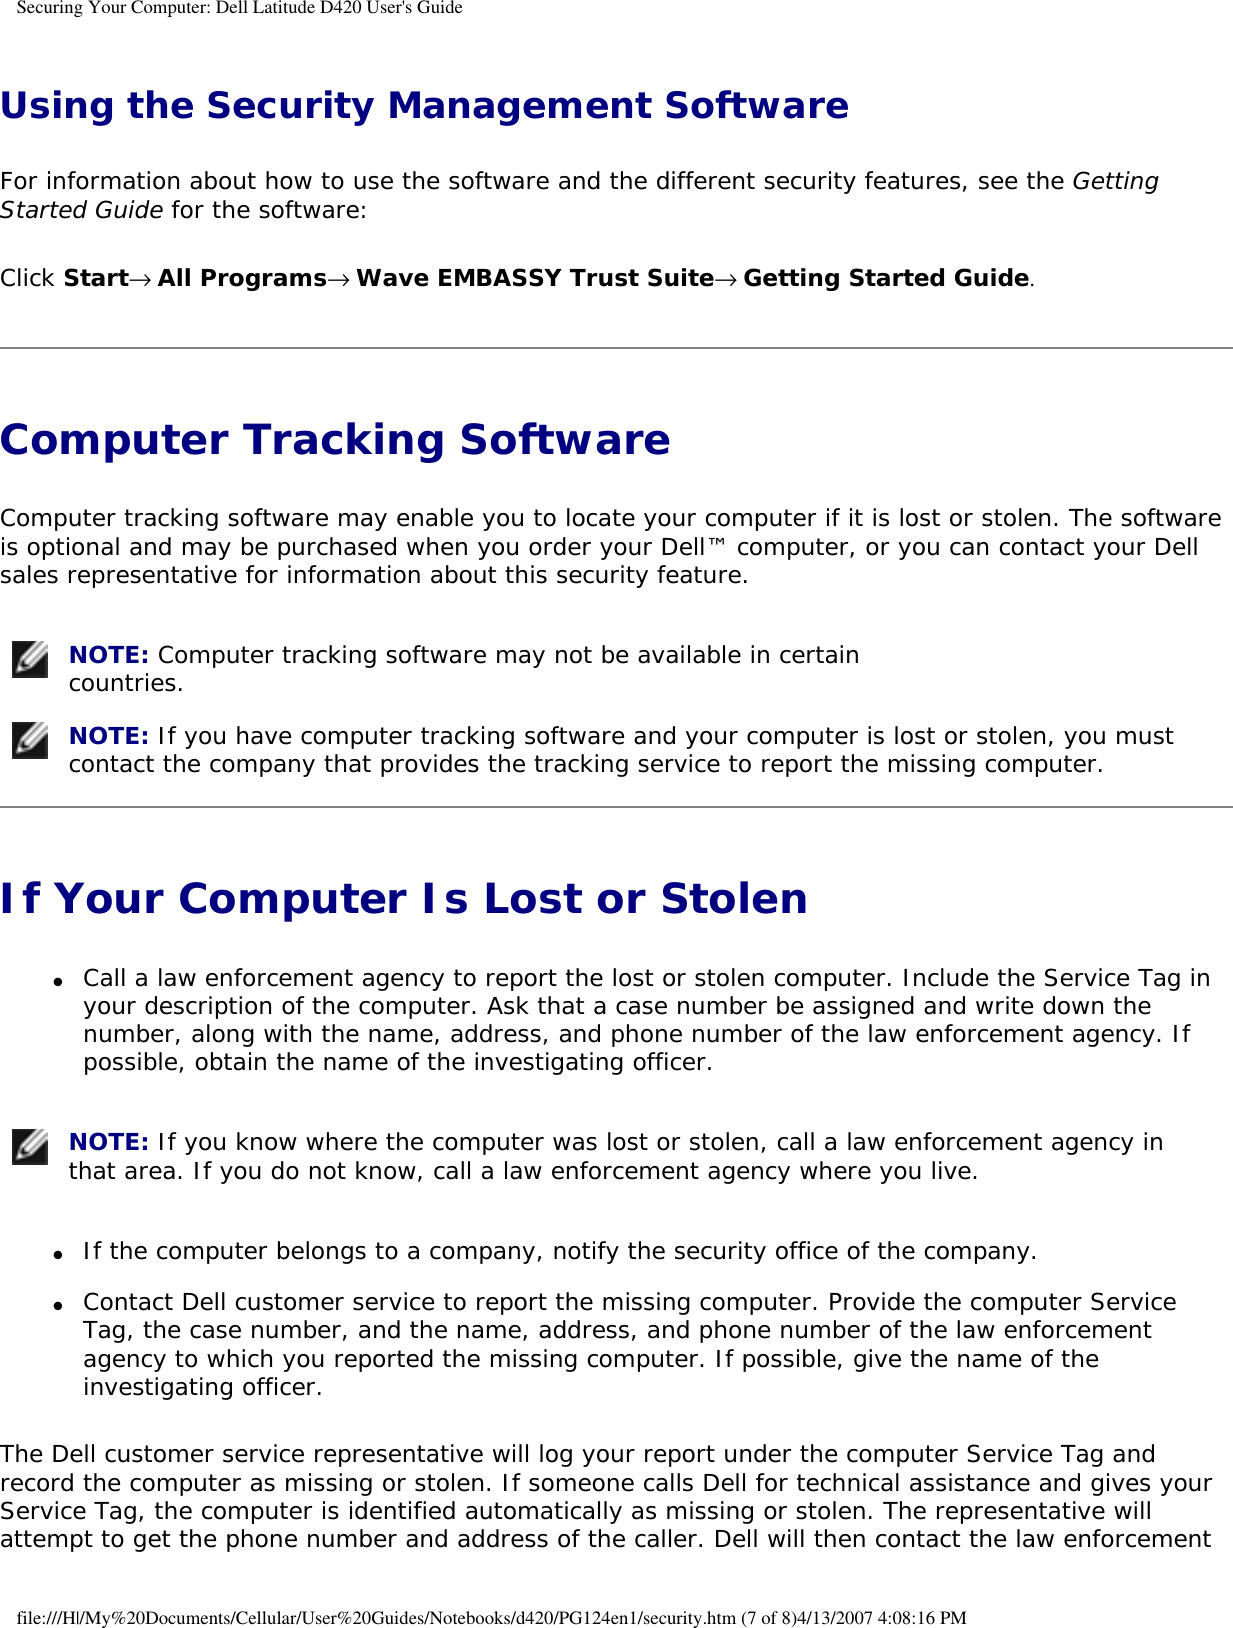 Securing Your Computer: Dell Latitude D420 User&apos;s Guide Using the Security Management SoftwareFor information about how to use the software and the different security features, see the Getting Started Guide for the software: Click Start→ All Programs→ Wave EMBASSY Trust Suite→ Getting Started Guide.Computer Tracking Software Computer tracking software may enable you to locate your computer if it is lost or stolen. The software is optional and may be purchased when you order your Dell™ computer, or you can contact your Dell sales representative for information about this security feature. NOTE: Computer tracking software may not be available in certain countries.  NOTE: If you have computer tracking software and your computer is lost or stolen, you must contact the company that provides the tracking service to report the missing computer. If Your Computer Is Lost or Stolen ●     Call a law enforcement agency to report the lost or stolen computer. Include the Service Tag in your description of the computer. Ask that a case number be assigned and write down the number, along with the name, address, and phone number of the law enforcement agency. If possible, obtain the name of the investigating officer.   NOTE: If you know where the computer was lost or stolen, call a law enforcement agency in that area. If you do not know, call a law enforcement agency where you live. ●     If the computer belongs to a company, notify the security office of the company.  ●     Contact Dell customer service to report the missing computer. Provide the computer Service Tag, the case number, and the name, address, and phone number of the law enforcement agency to which you reported the missing computer. If possible, give the name of the investigating officer.  The Dell customer service representative will log your report under the computer Service Tag and record the computer as missing or stolen. If someone calls Dell for technical assistance and gives your Service Tag, the computer is identified automatically as missing or stolen. The representative will attempt to get the phone number and address of the caller. Dell will then contact the law enforcement file:///H|/My%20Documents/Cellular/User%20Guides/Notebooks/d420/PG124en1/security.htm (7 of 8)4/13/2007 4:08:16 PM